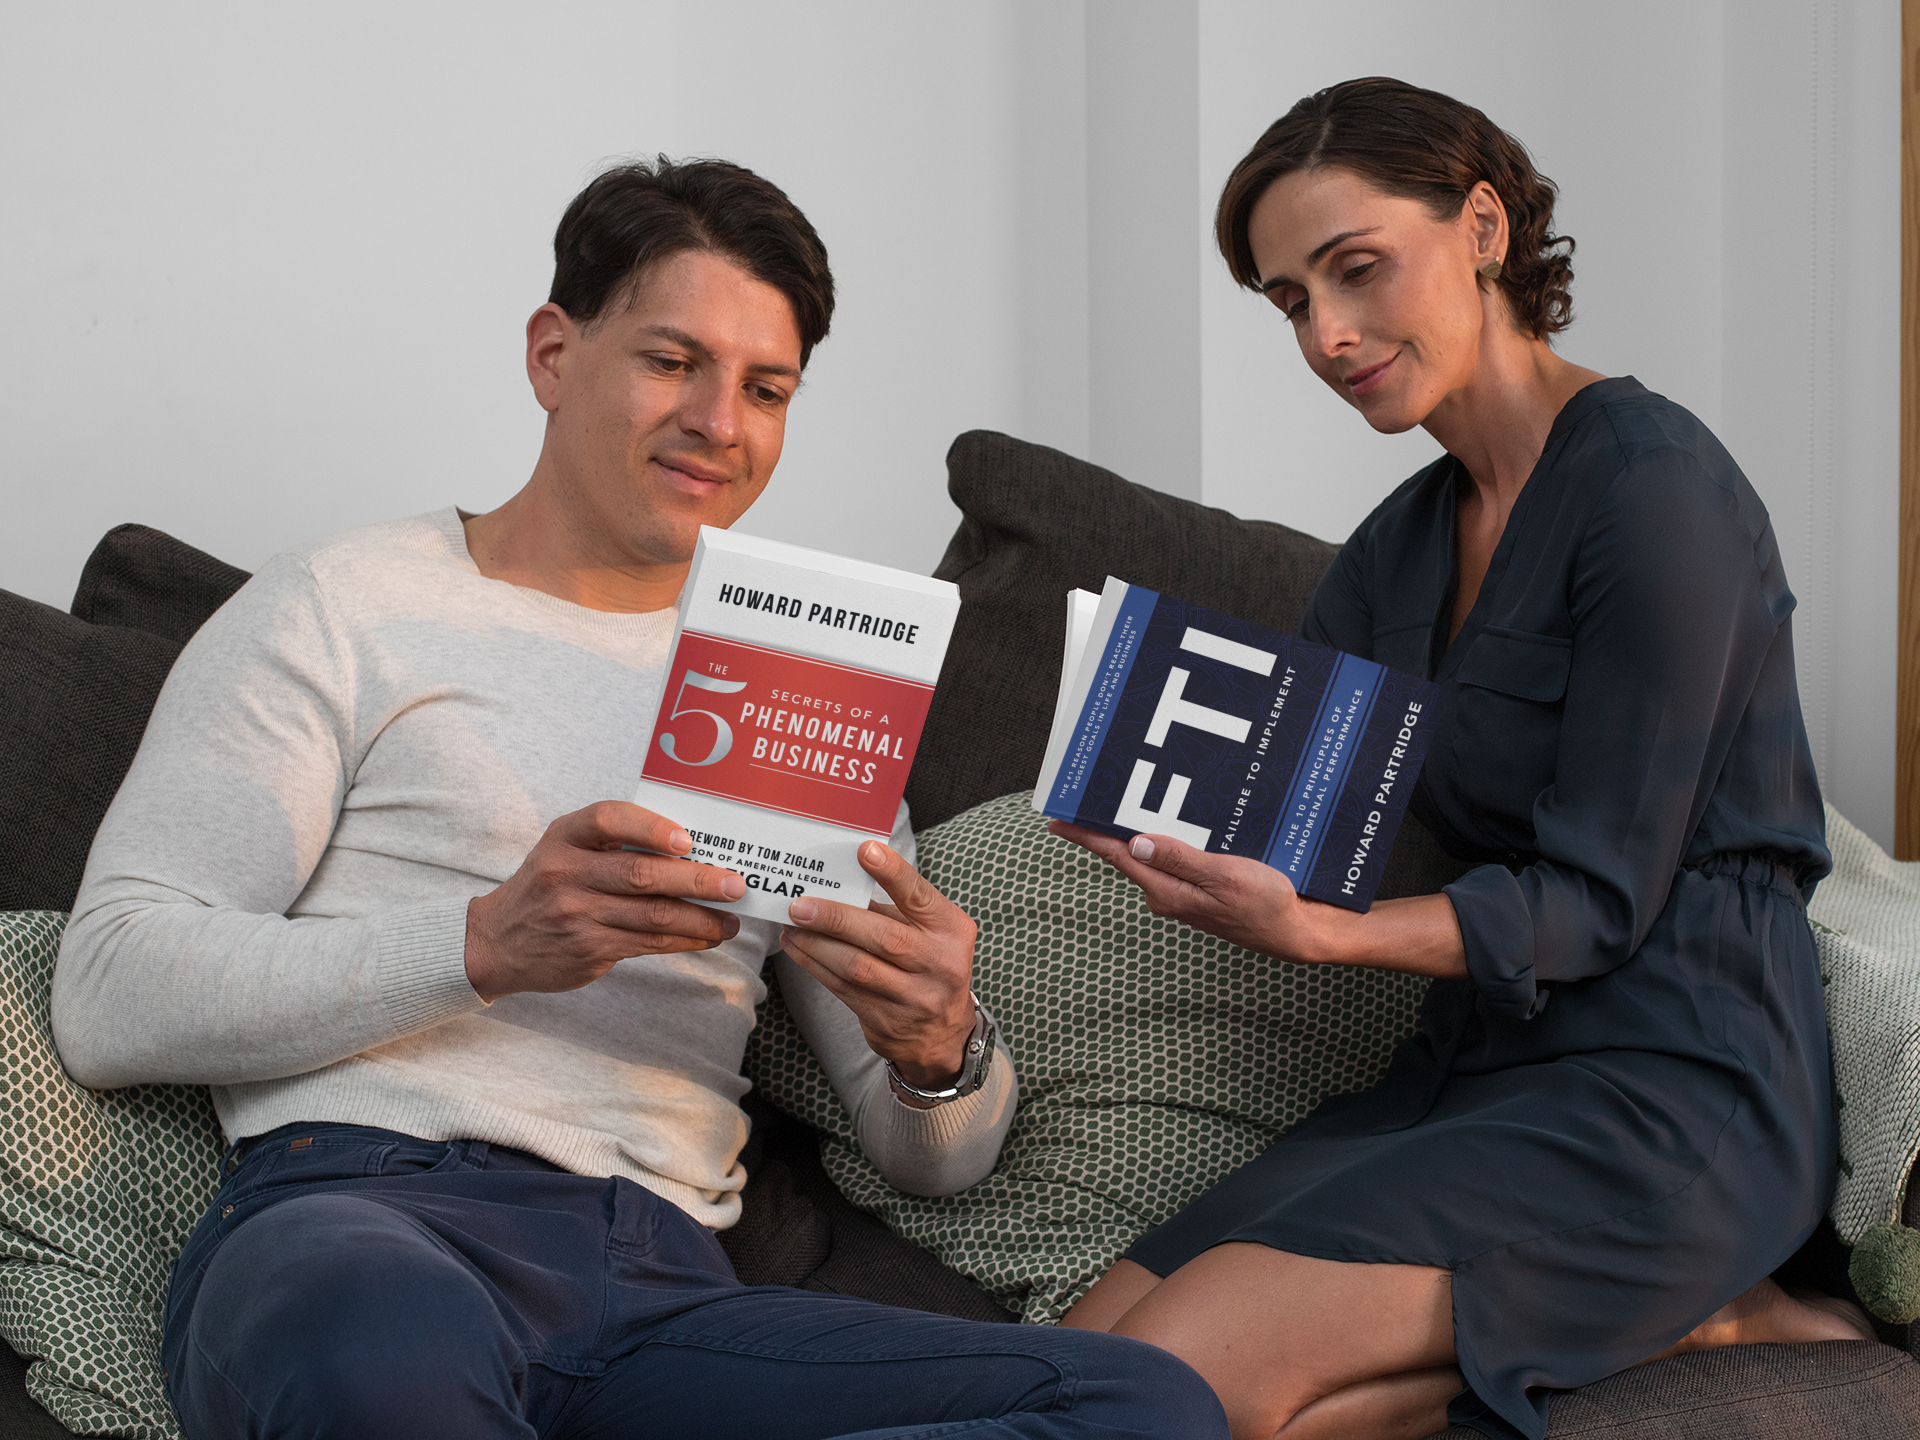 book-mockup-featuring-a-middle-aged-couple-reading-at-home-31702